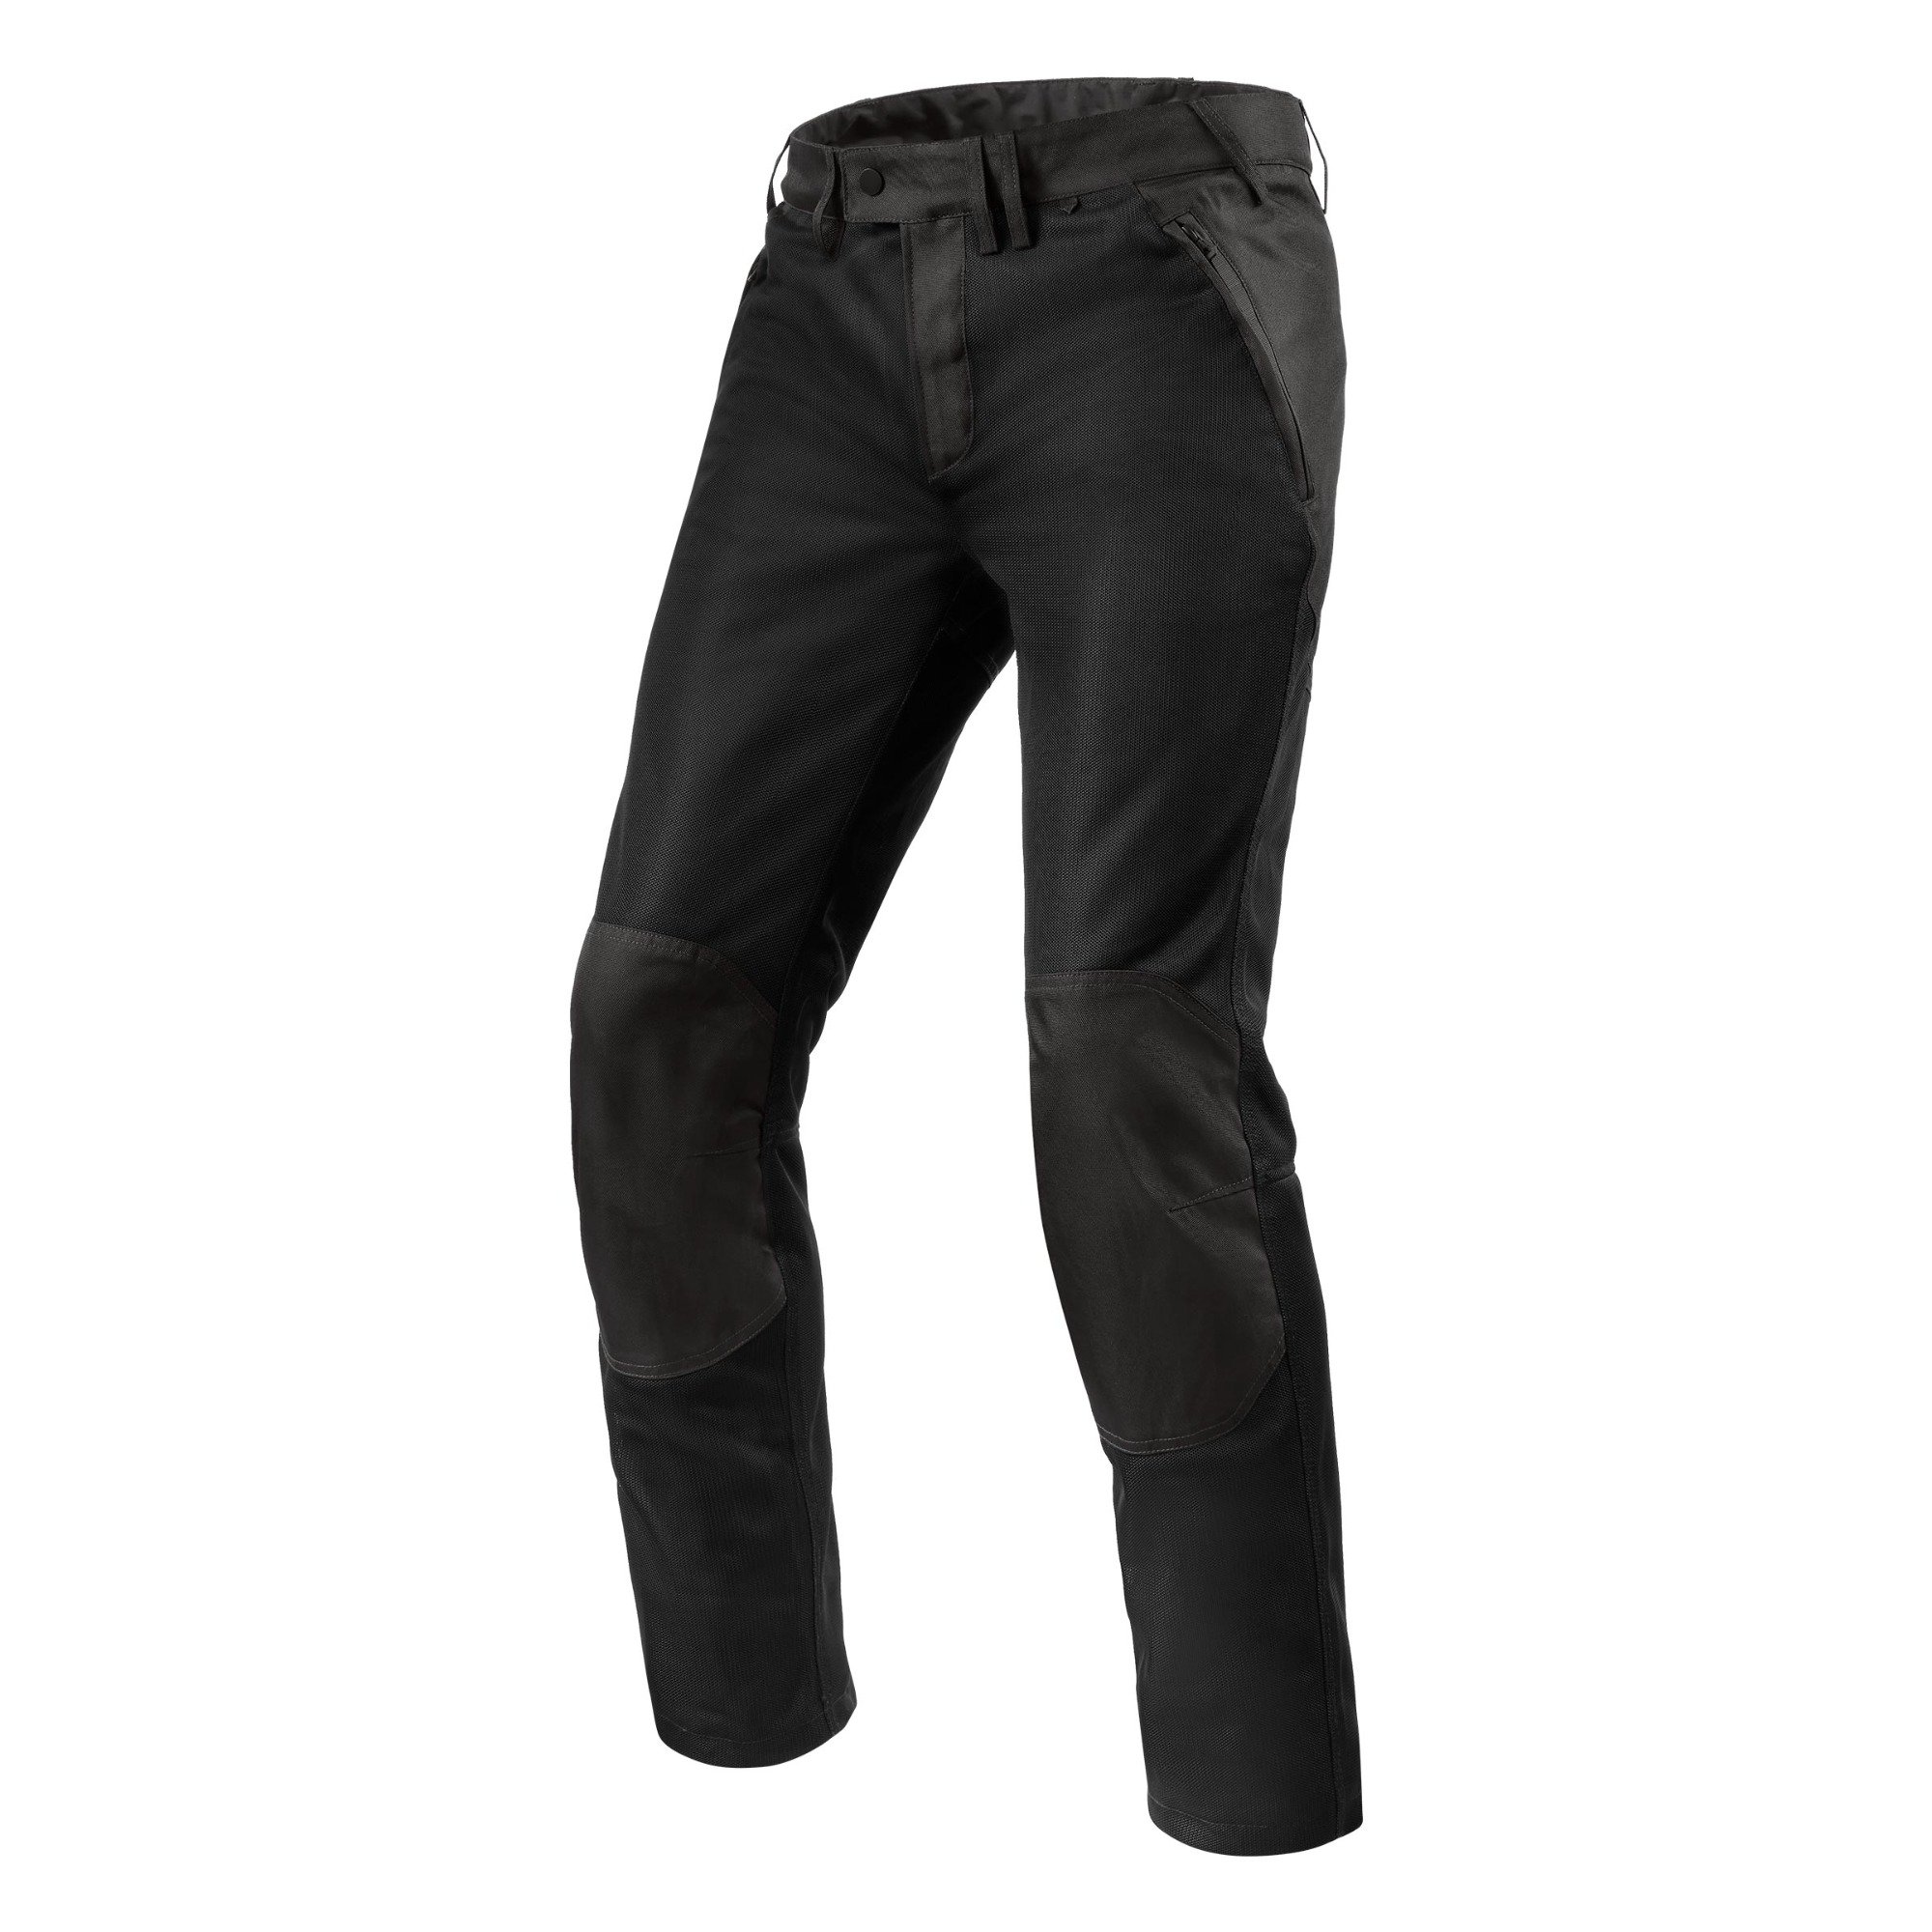 Image of REV'IT! Trousers Eclipse Black Standard Size 2XL ID 8700001346399